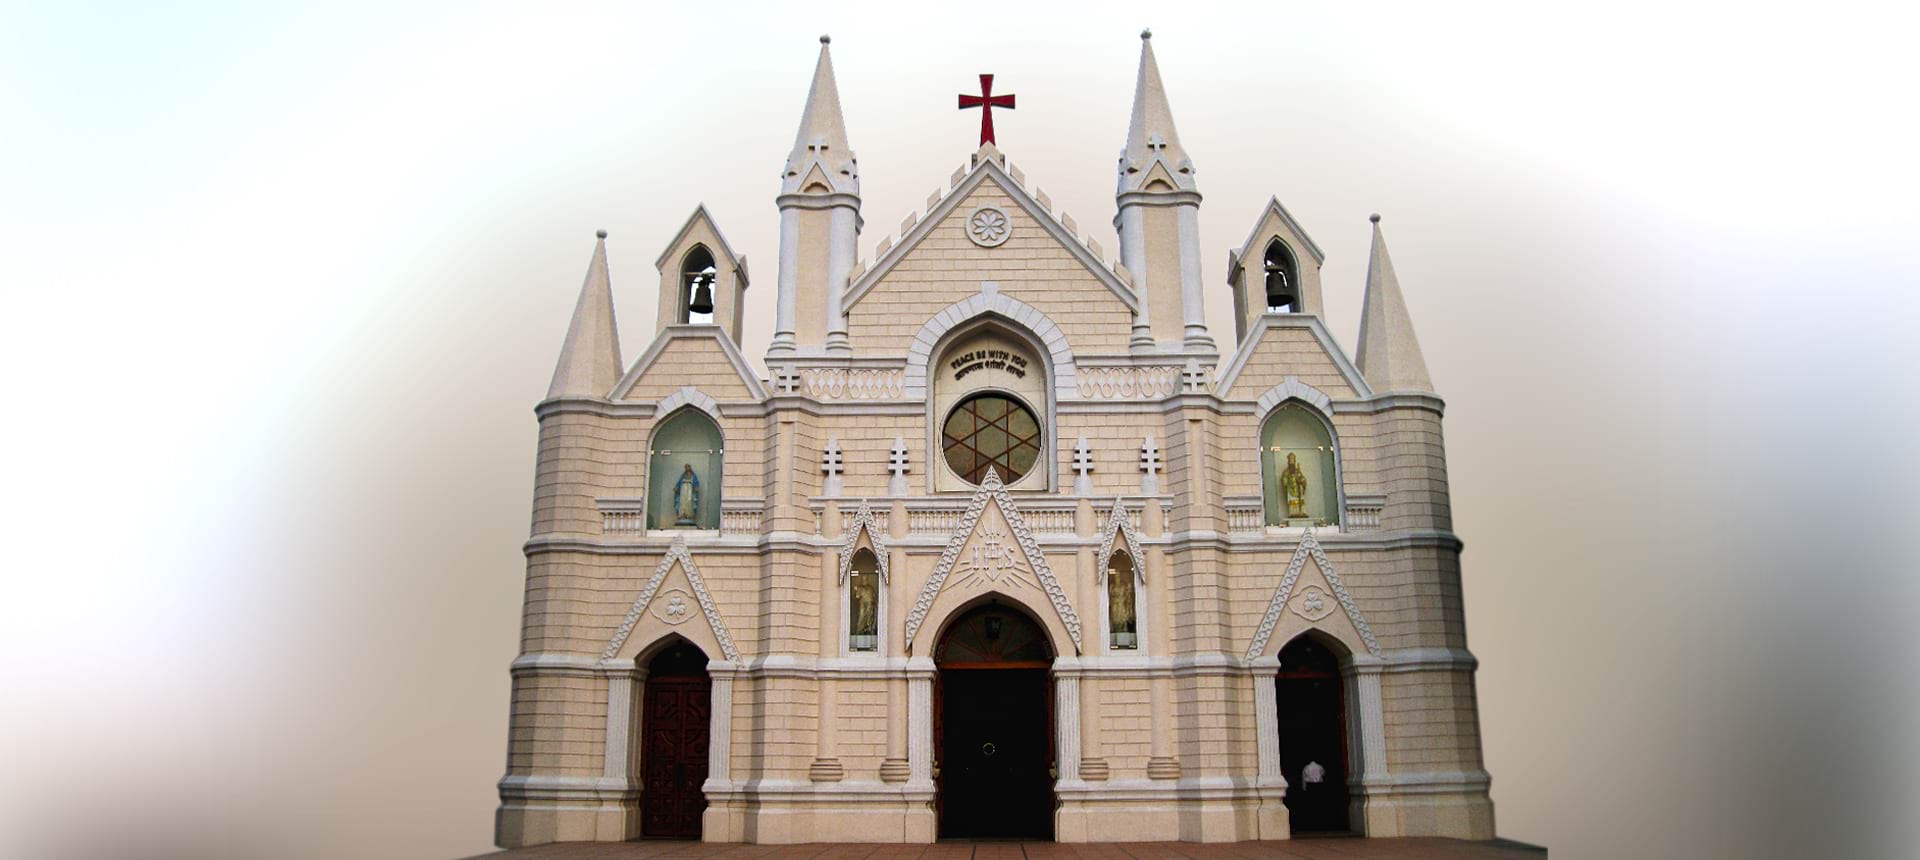 ST. PATRICK'S CATHEDRAL, Pune